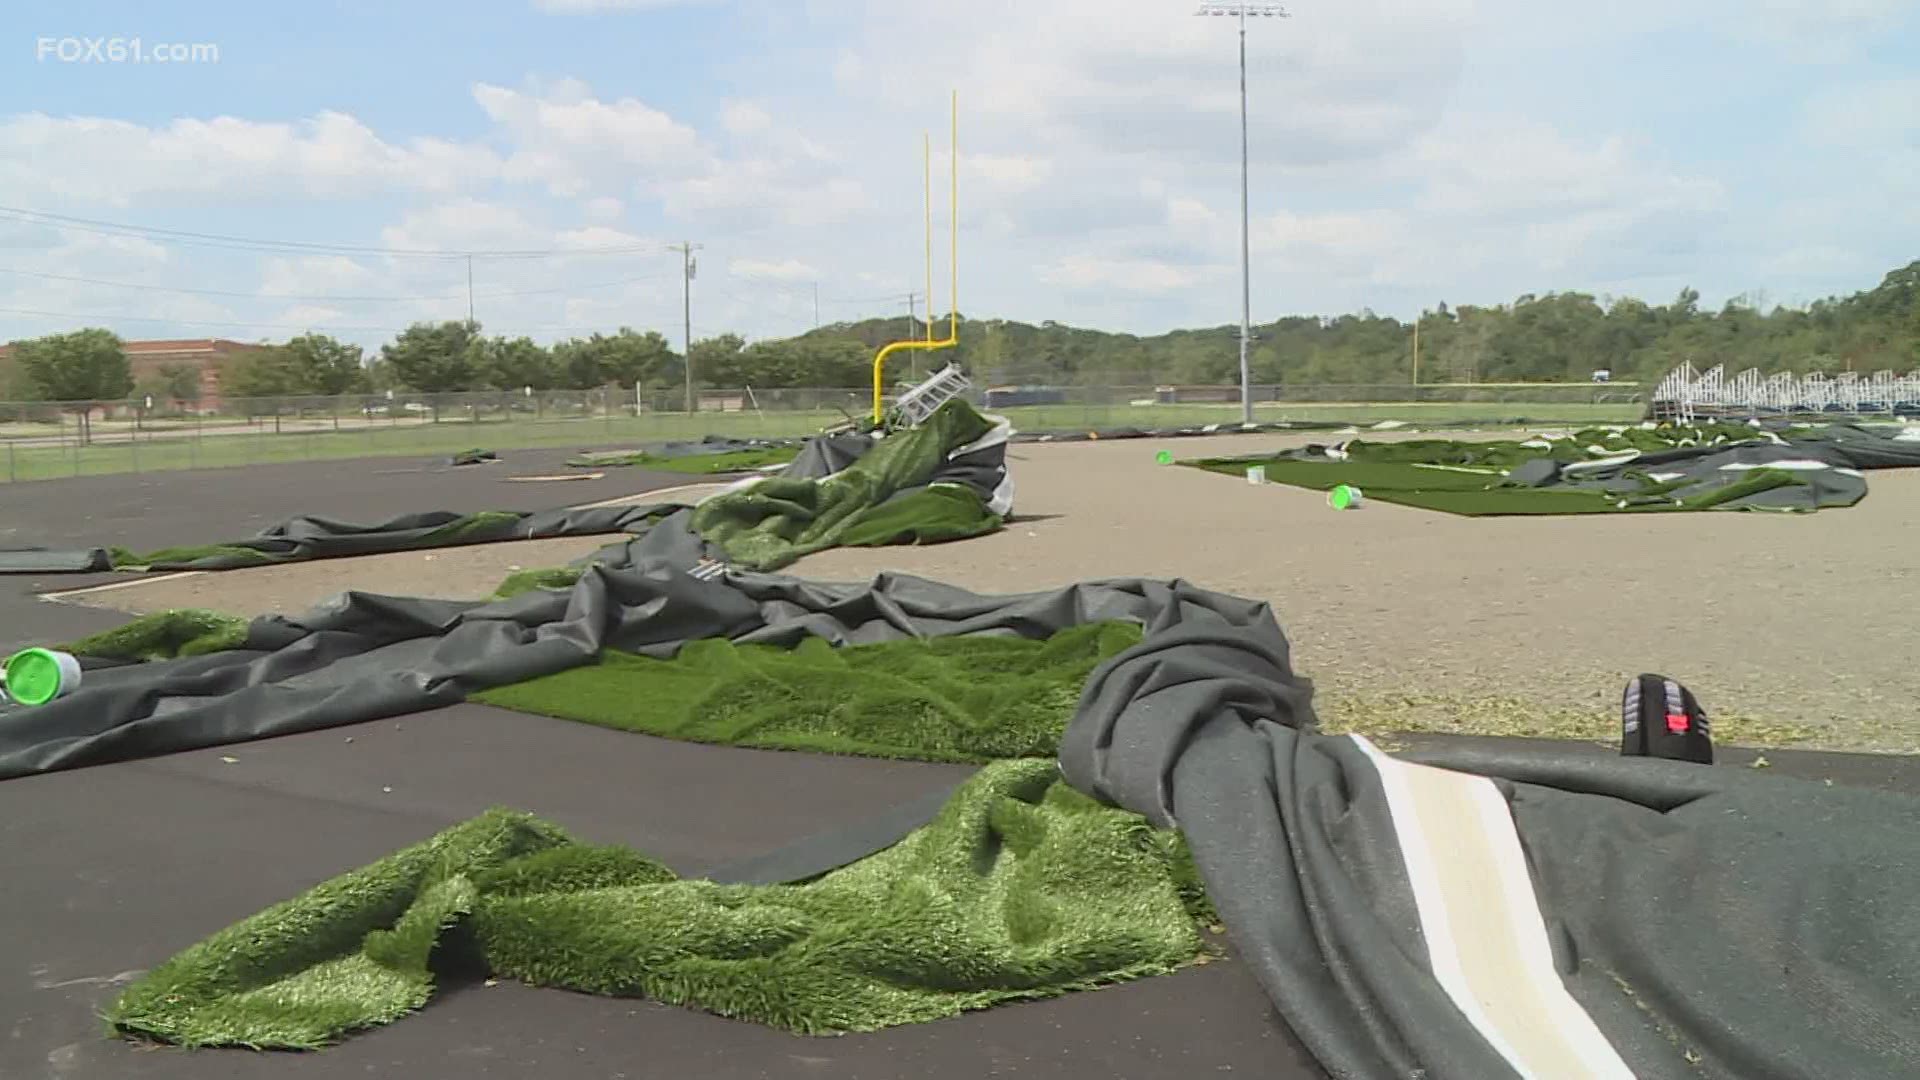 Workers were installing the turf as the storm swept over them. The field is now considered a complete loss.